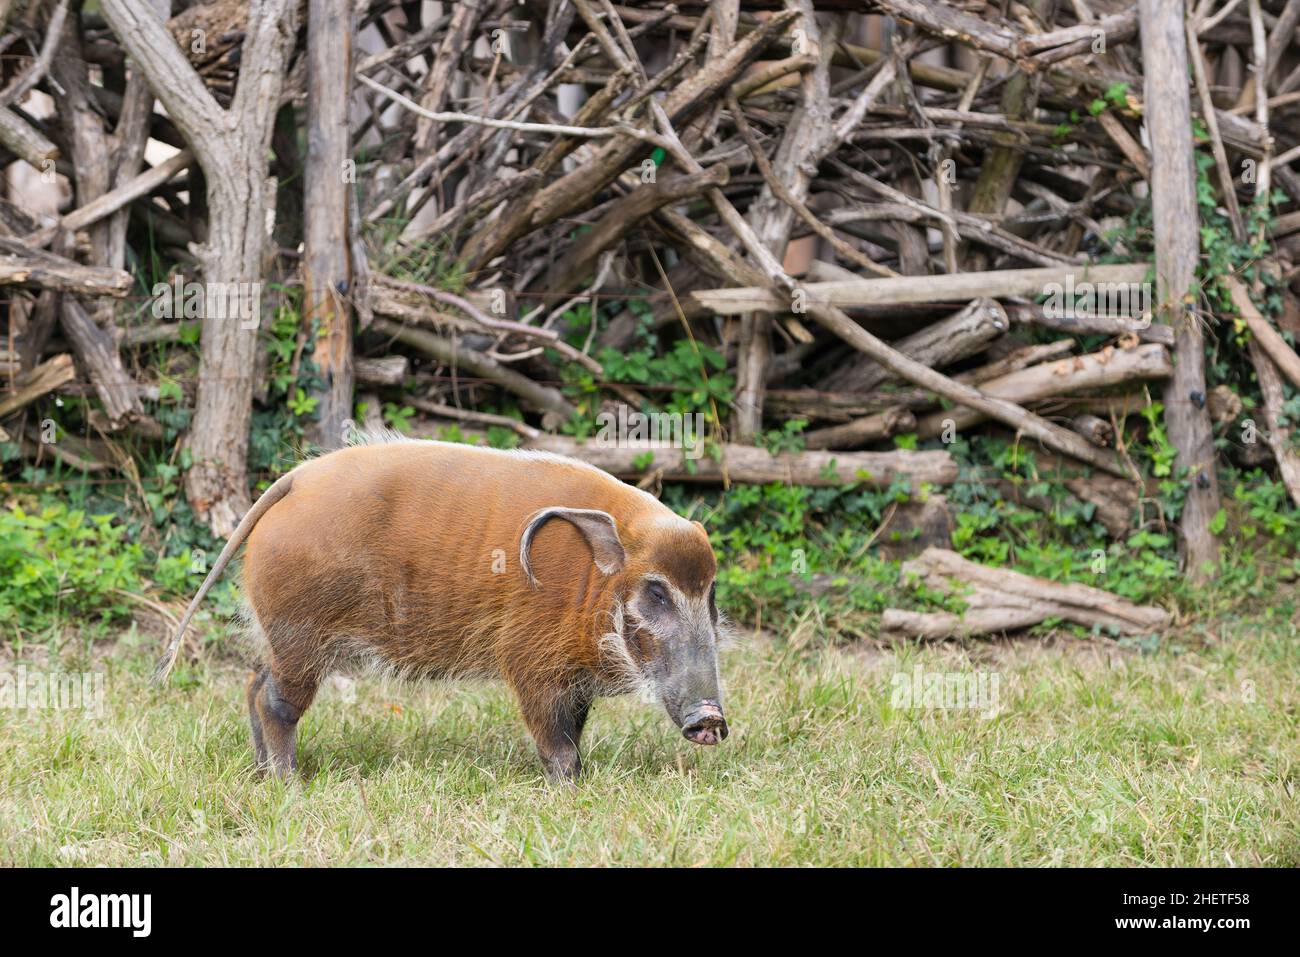 African bush pig eating grass with wood in background Stock Photo